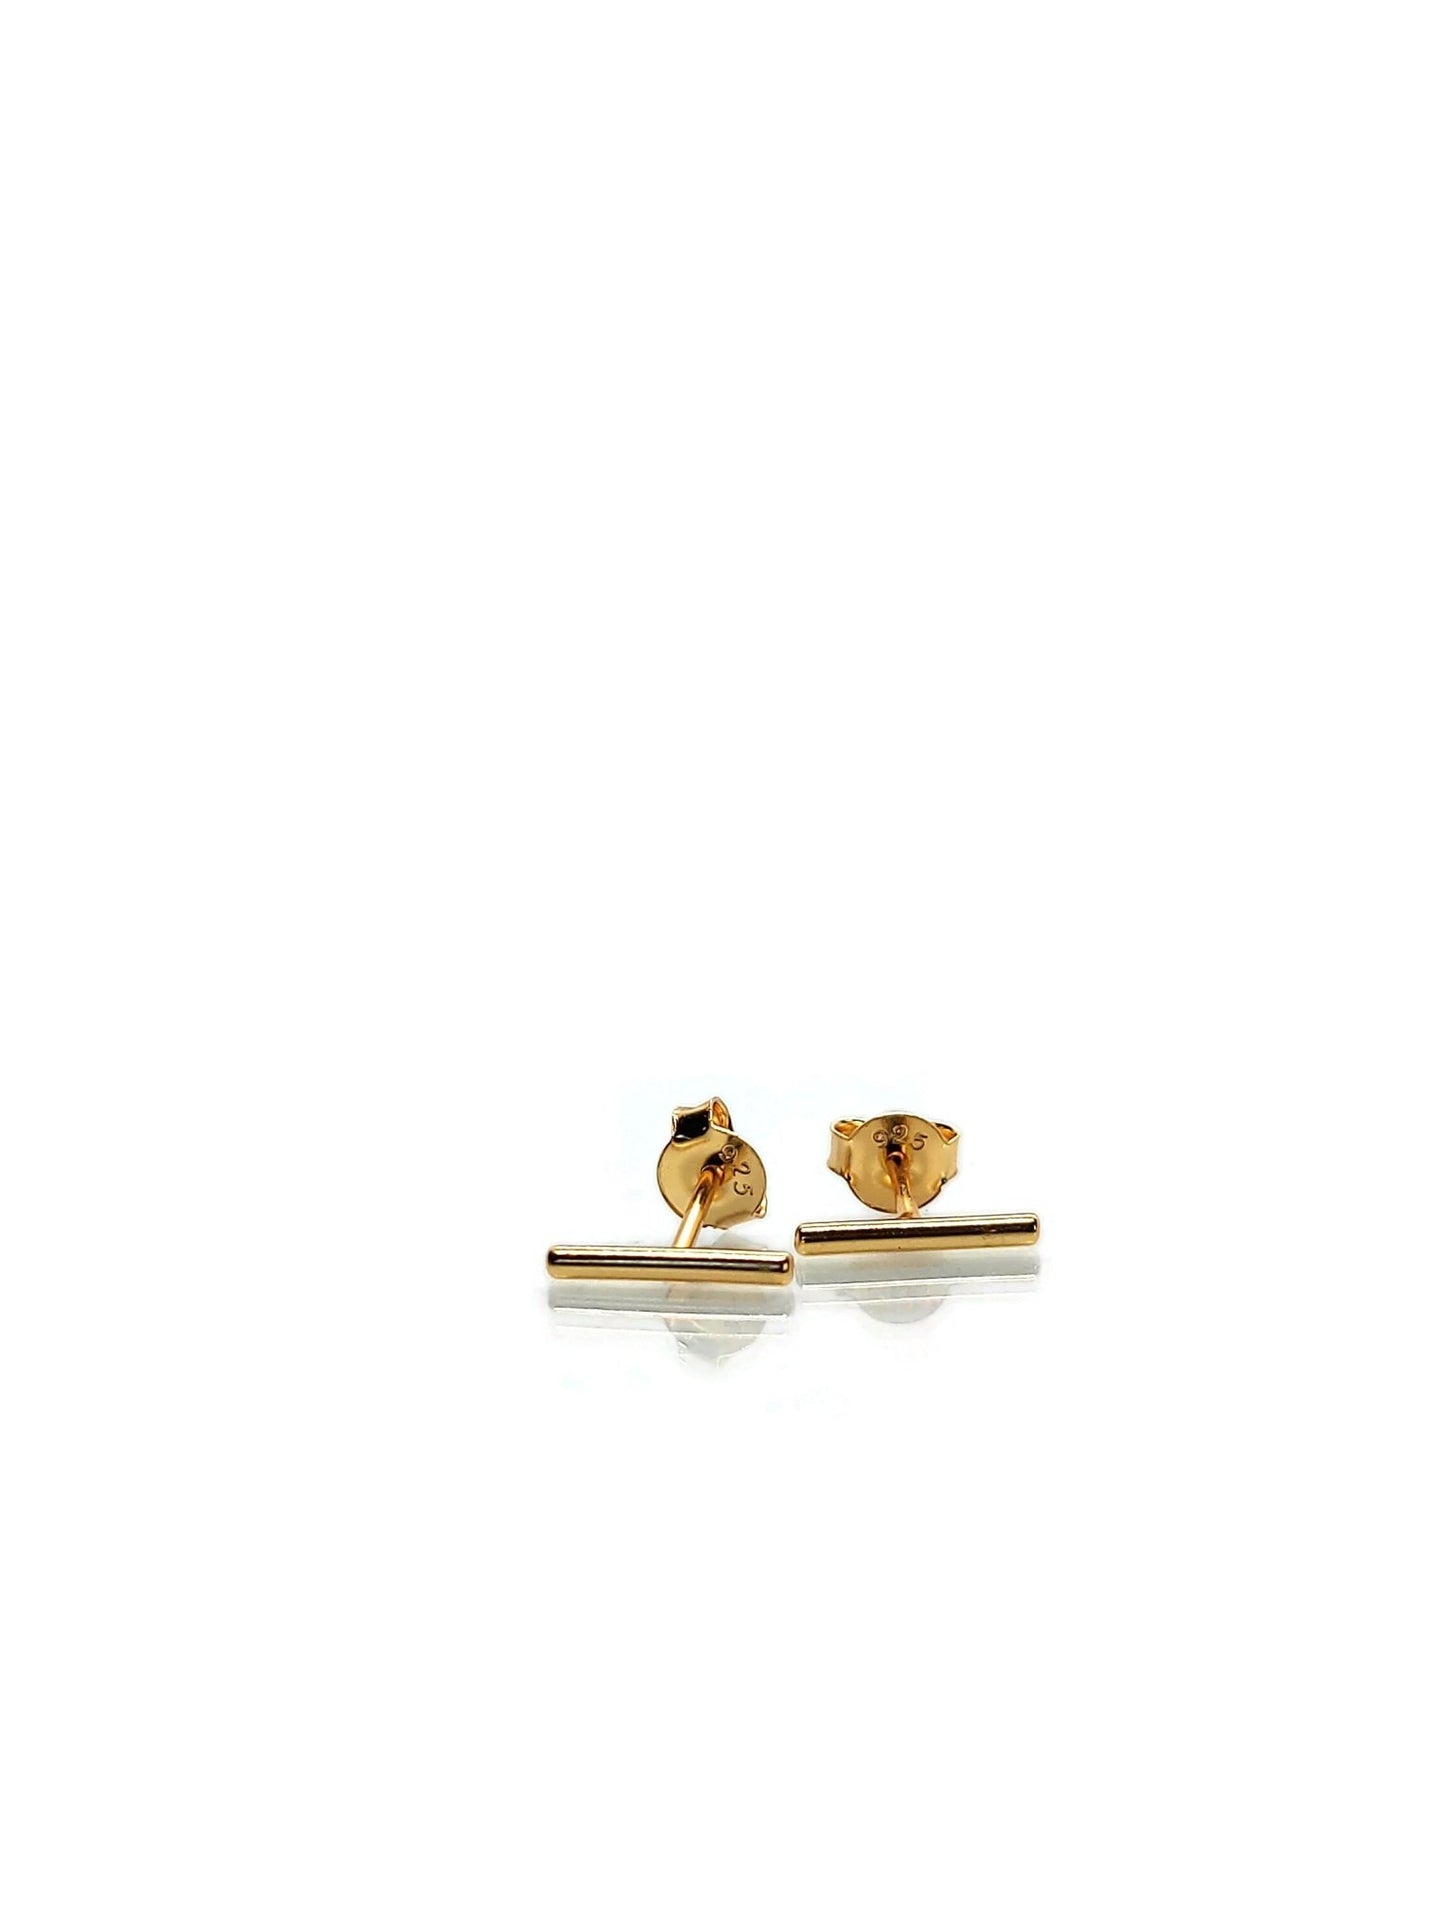 gold stick stud post earrings. gold vermeil. gold plated silver_4